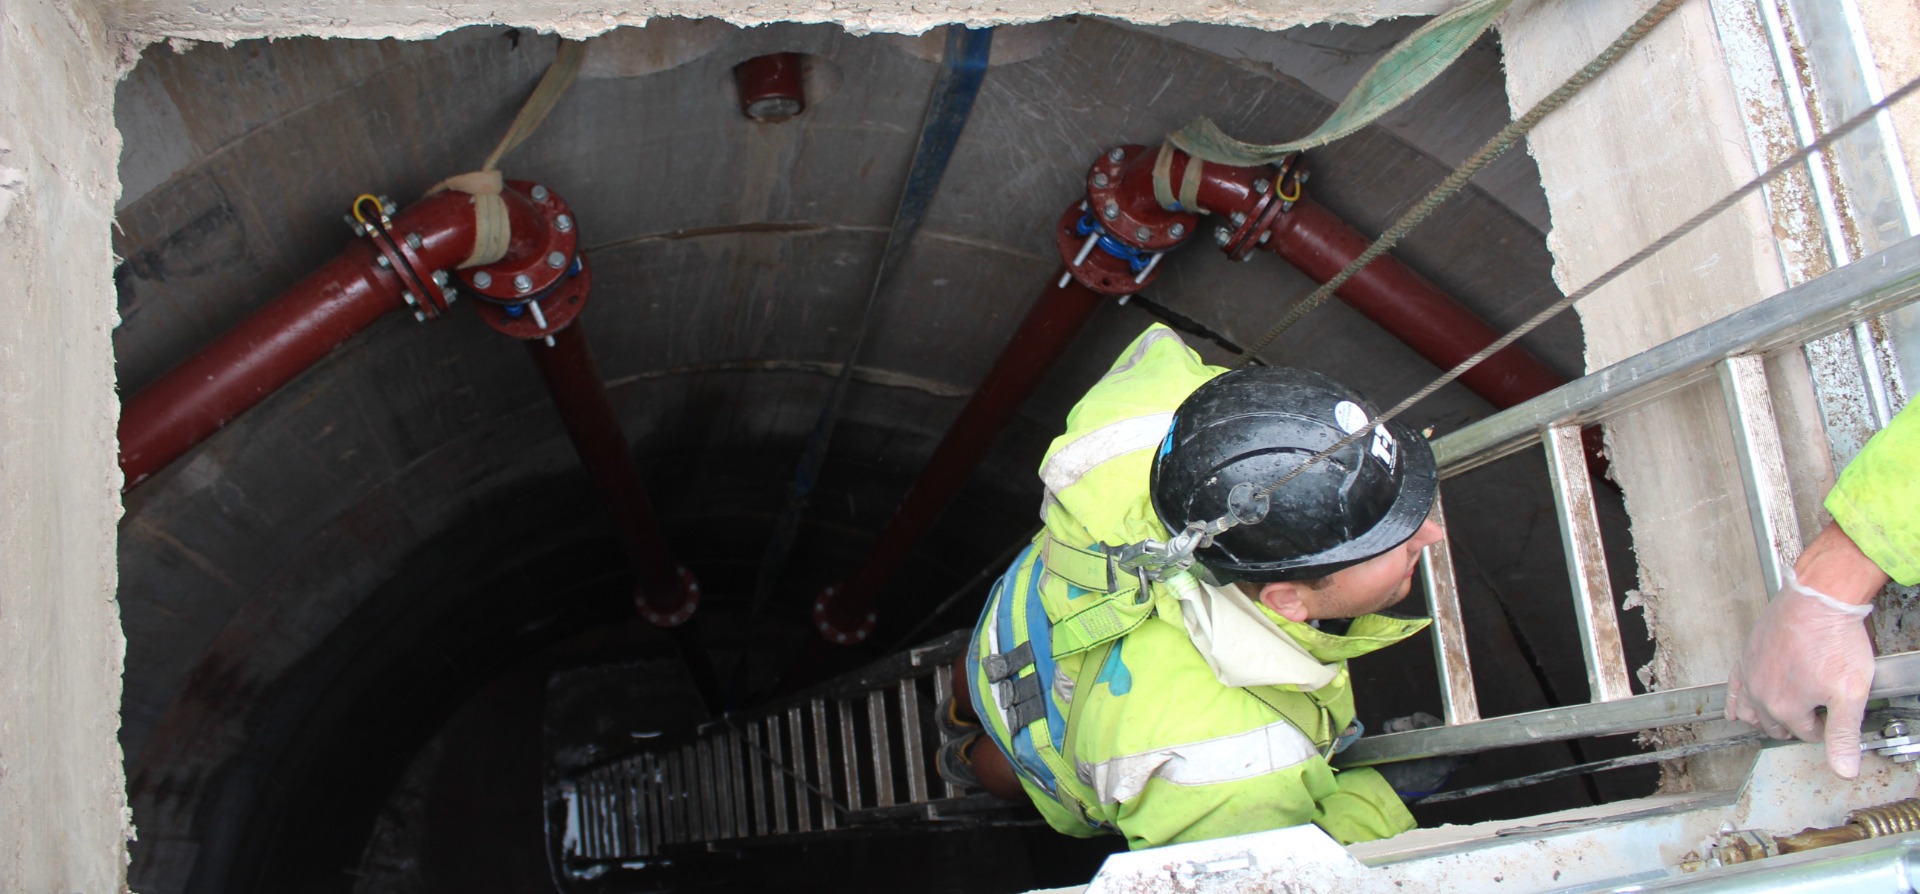 A T-T Engineer working on-site within a confined space, descending a ladder into a pumping station chamber below ground, wearing a hard hat, harnesses and other appropriate safety equipment.